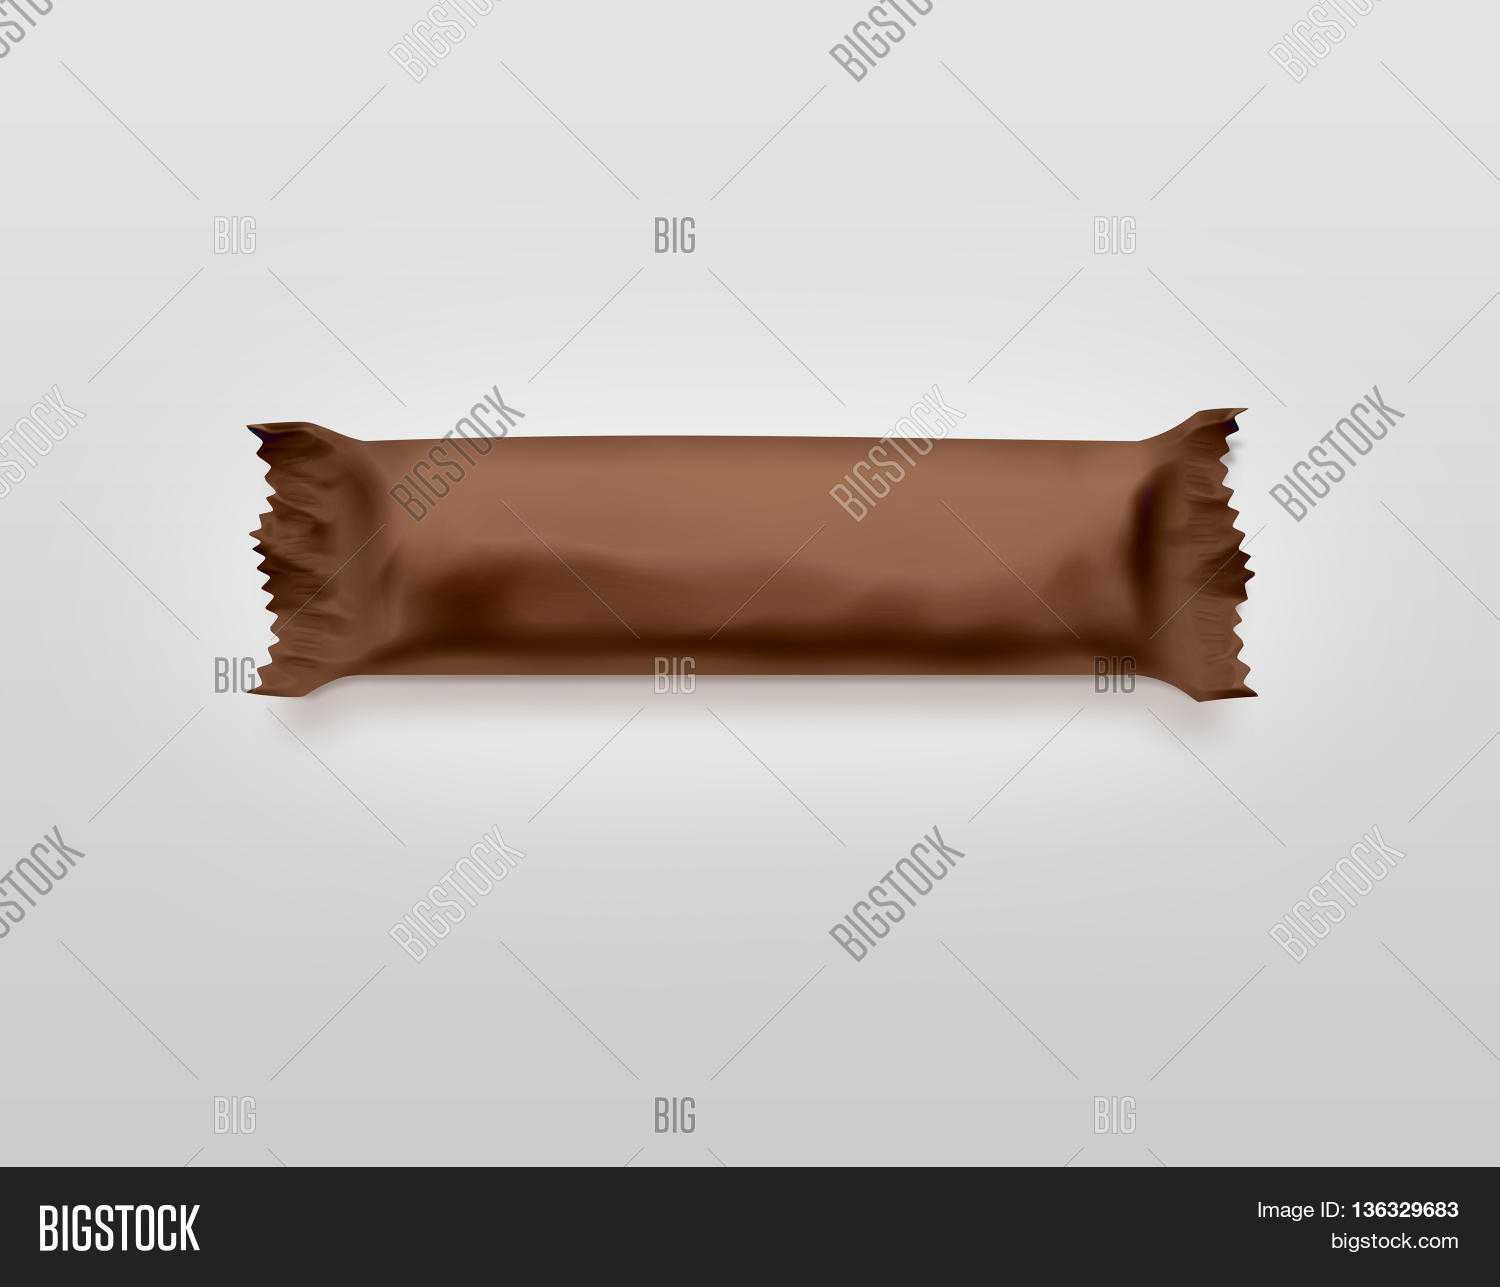 Blank Brown Candy Bar Image & Photo (Free Trial) | Bigstock In Free Blank Candy Bar Wrapper Template